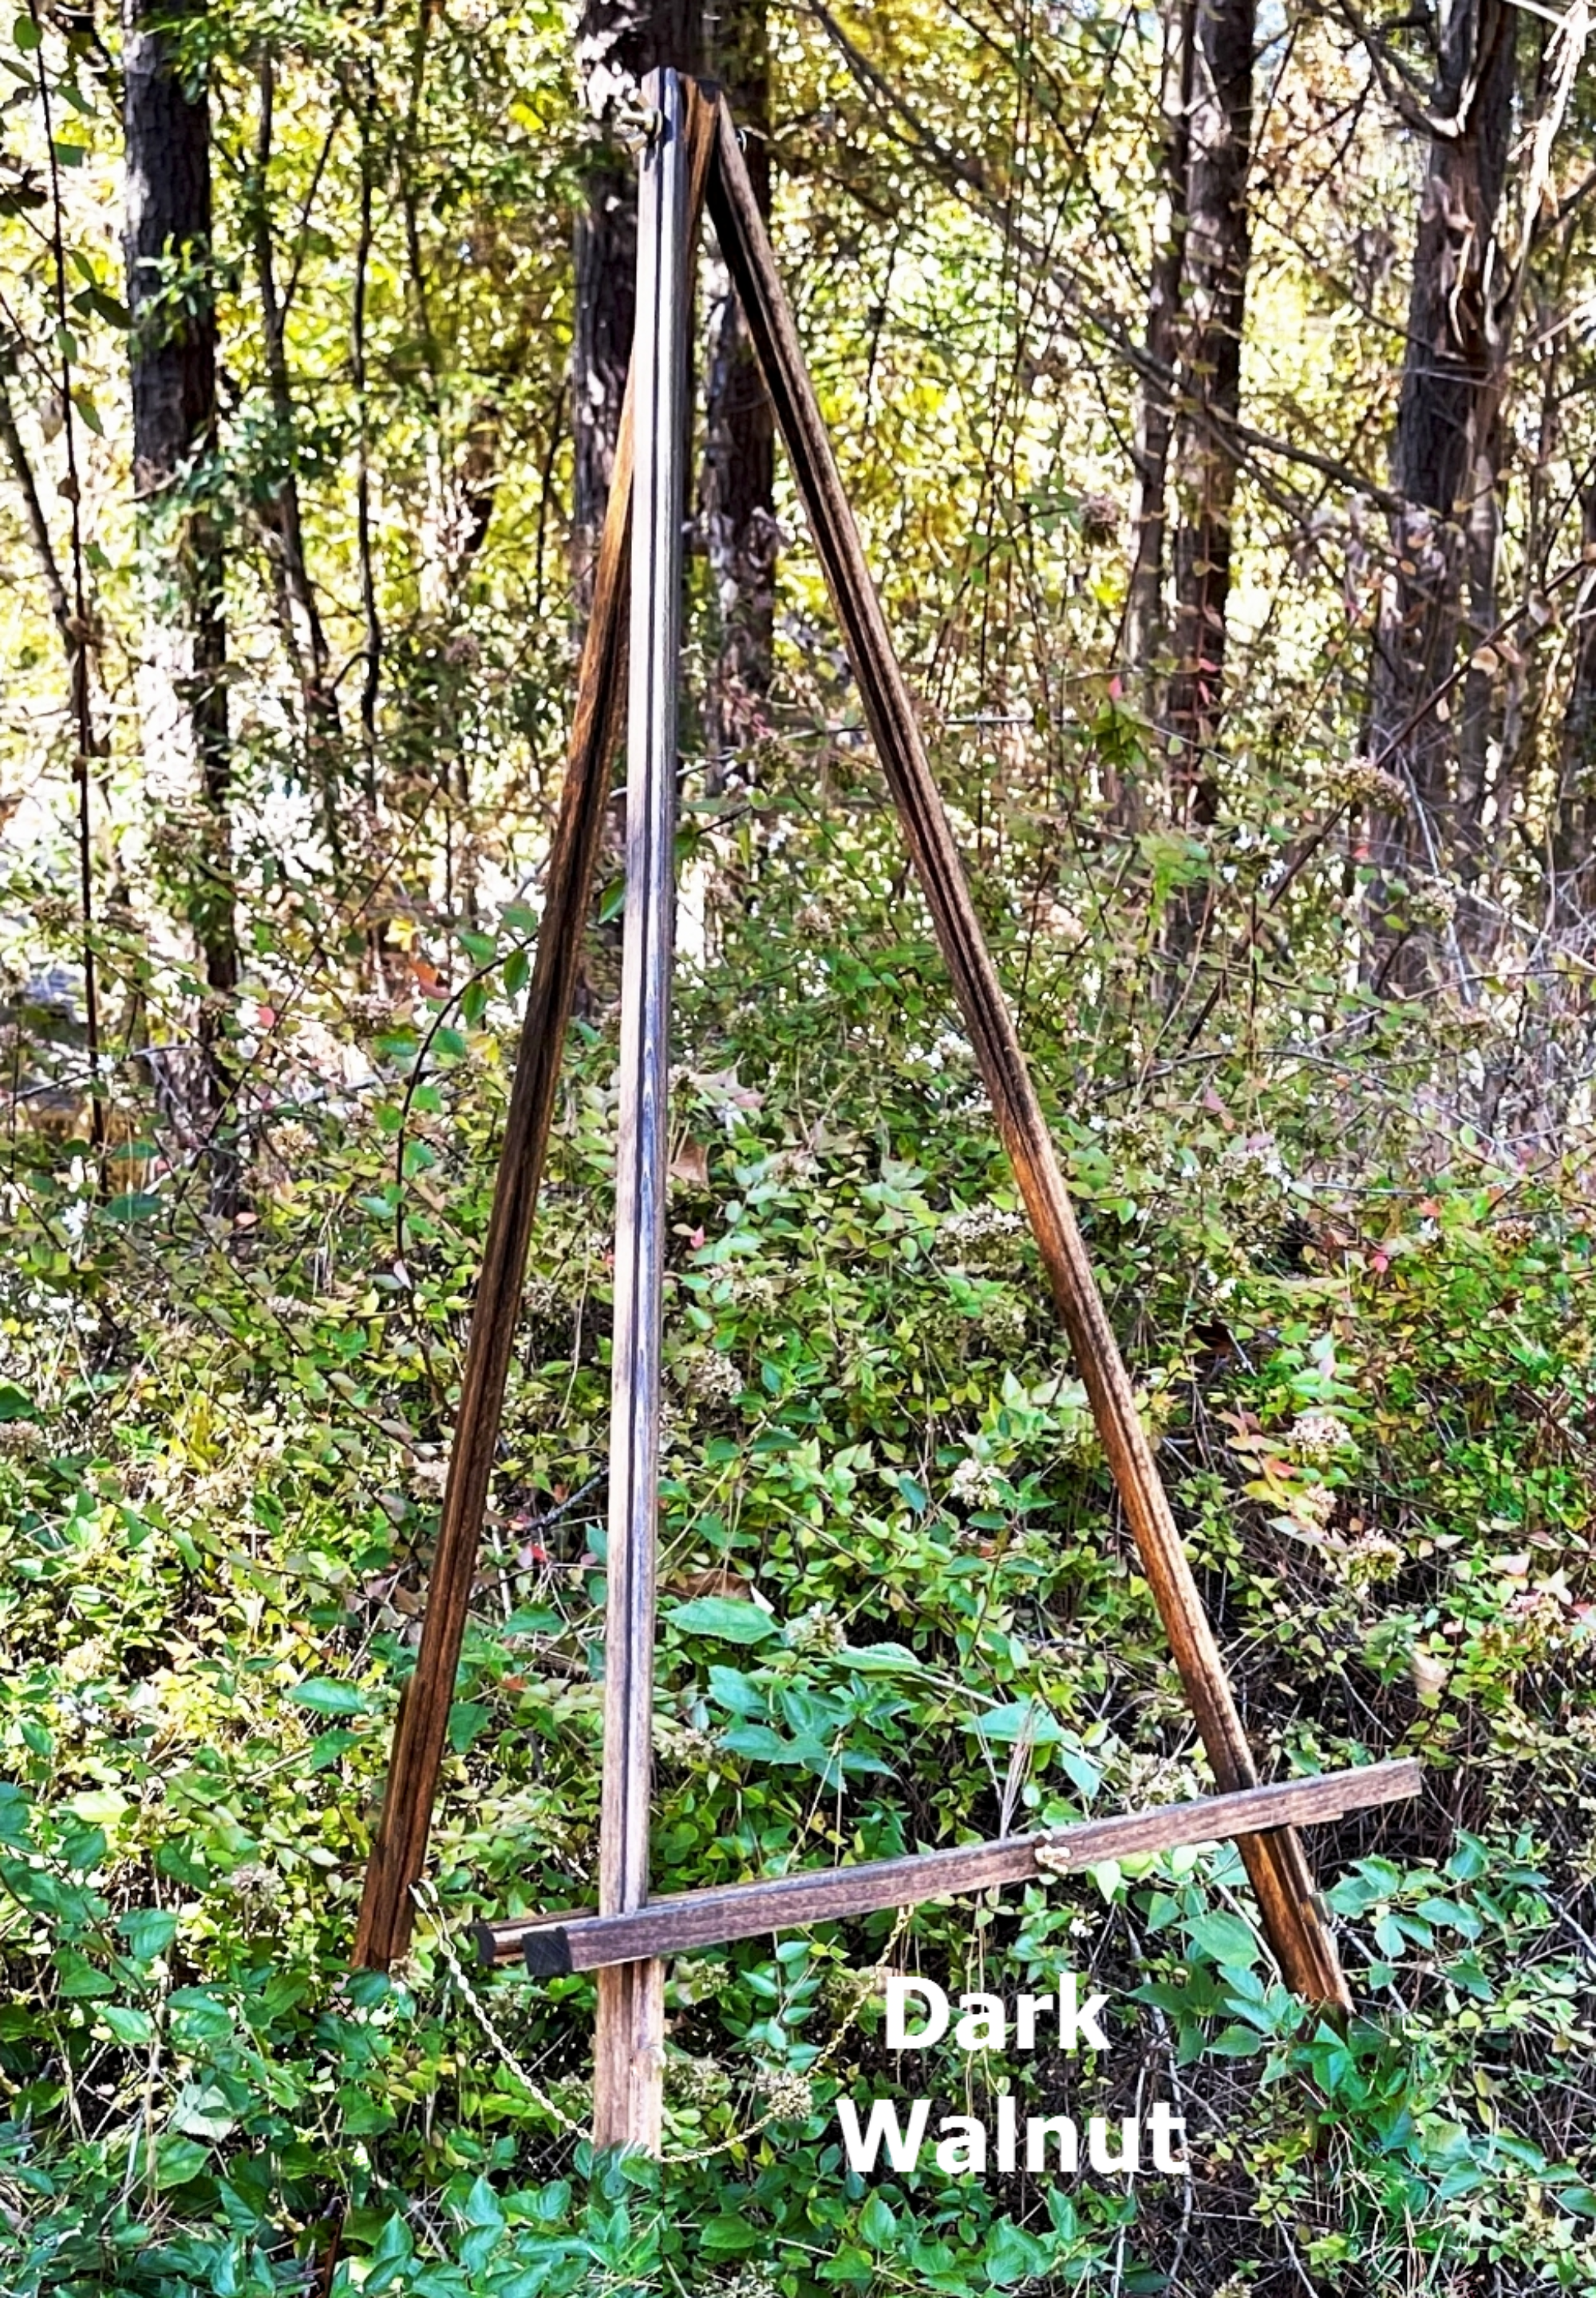 ANTIQUE BLACK FOREST WOODEN PICTURE FRAME EASEL STAND